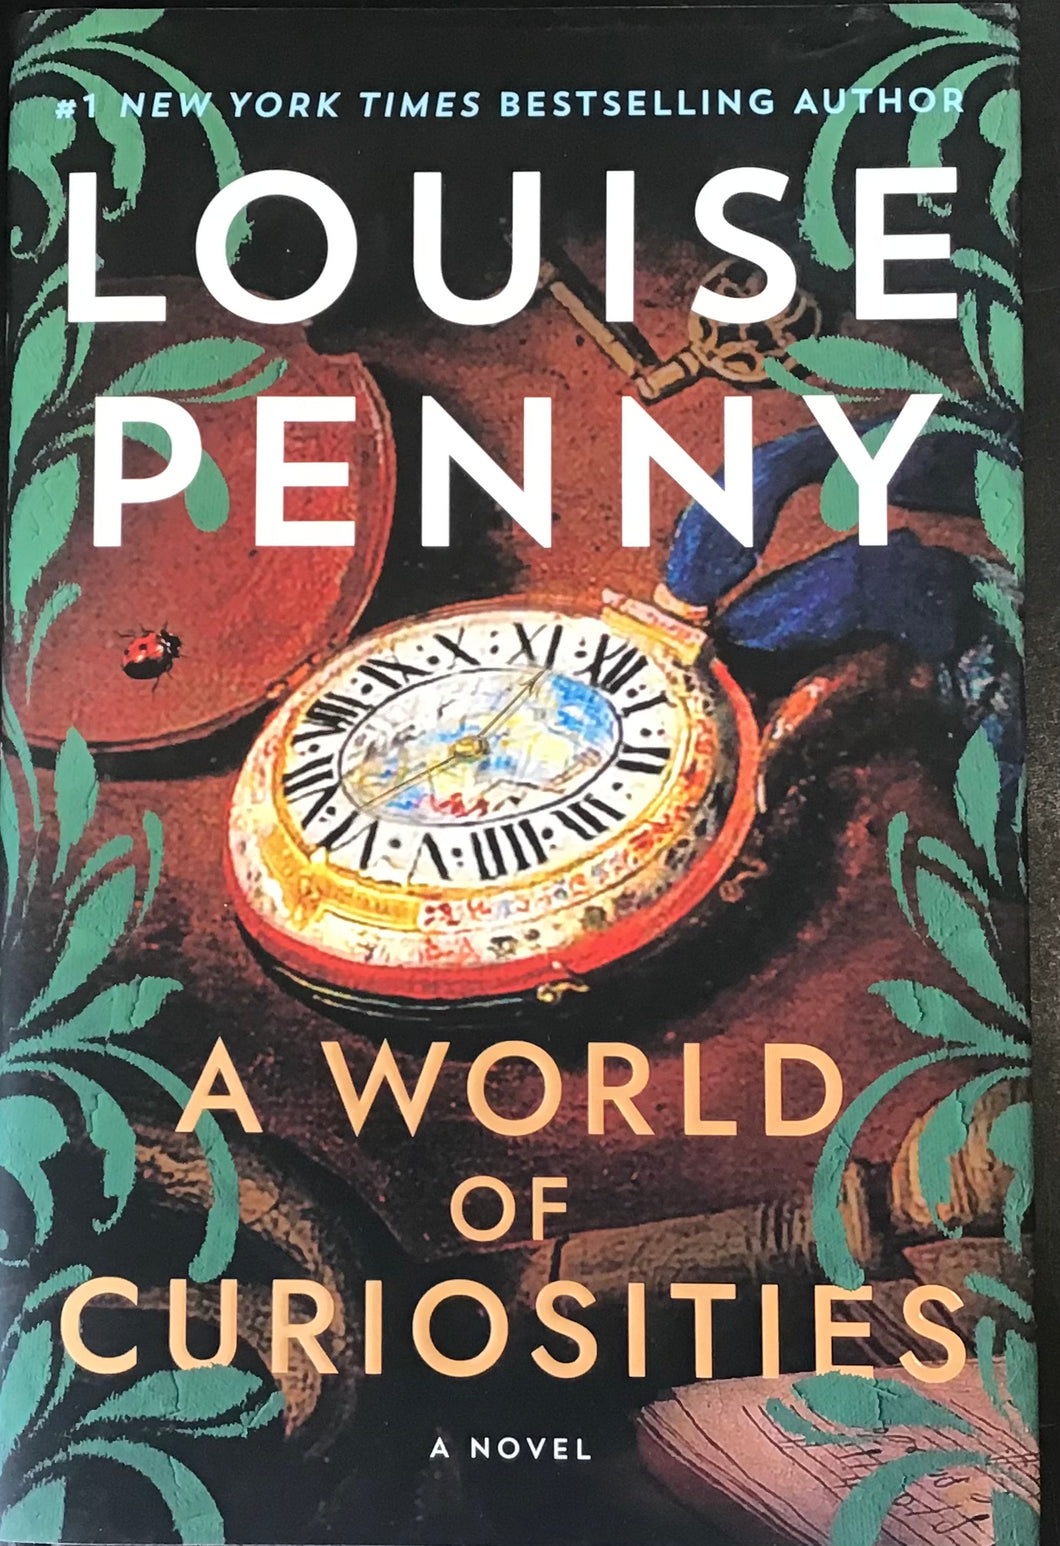 A World of Curiosities, Louis Penny